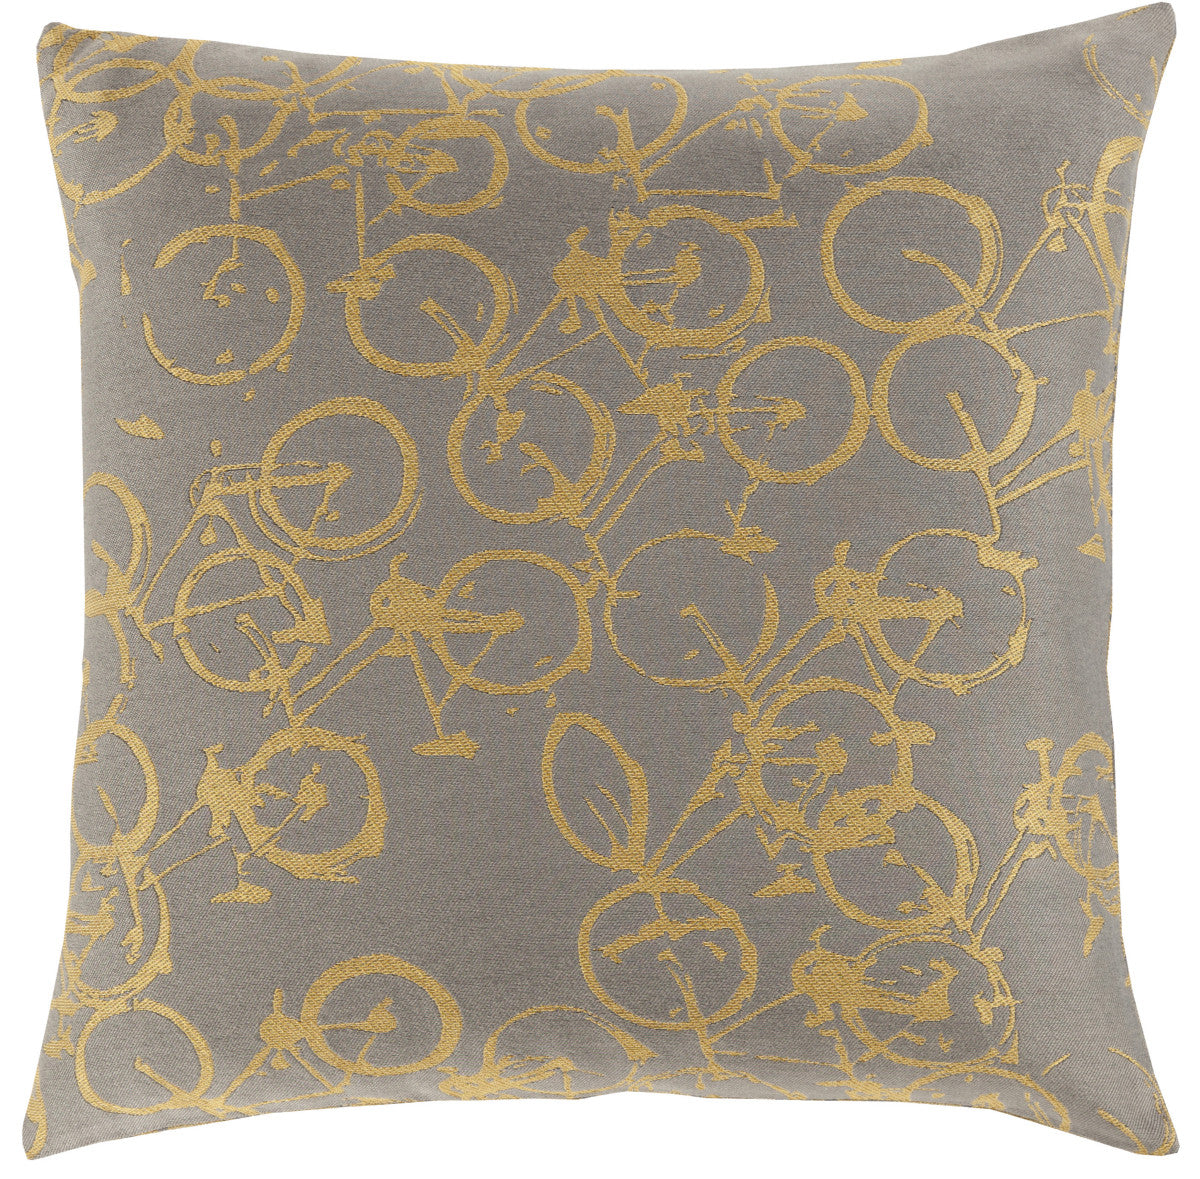 Surya Pedal Power Bold Bicycles PDP-002 Pillow by Mike Farrell